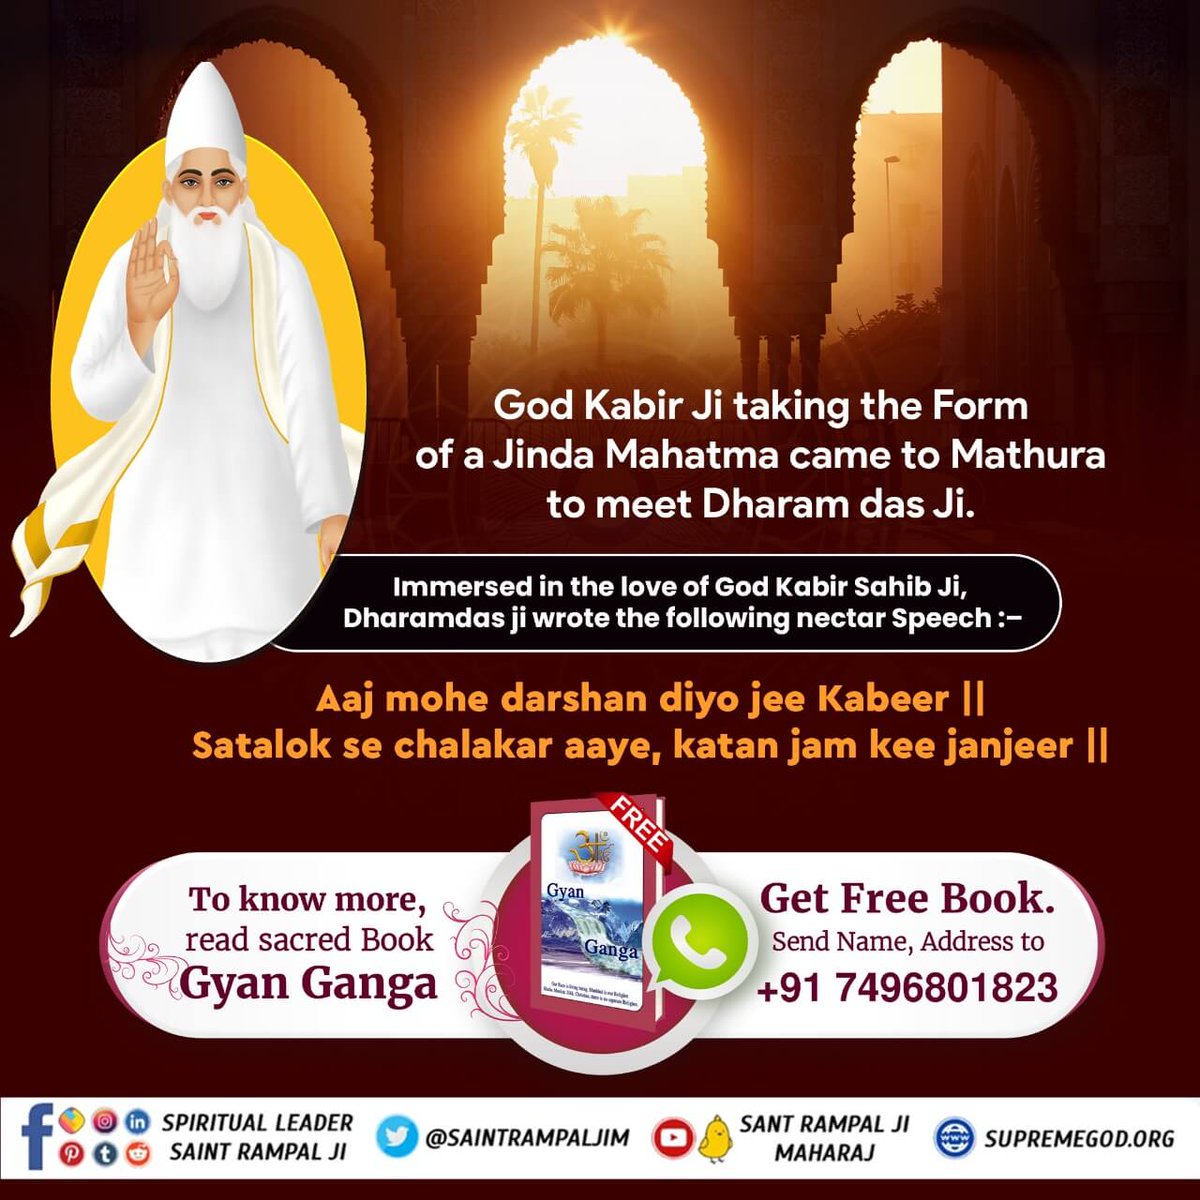 #आँखों_देखा_भगवान_को सुनो उस अमृतज्ञान को
Respected Dharamdas Saheb ji, from Bandhavgarh, Madhya Pradesh, whom the Supreme God met in the form of a living Mahatma in Mathura, showed him Satlok and explained the philosophy. There in Satlok, God is alive by showing two forms.